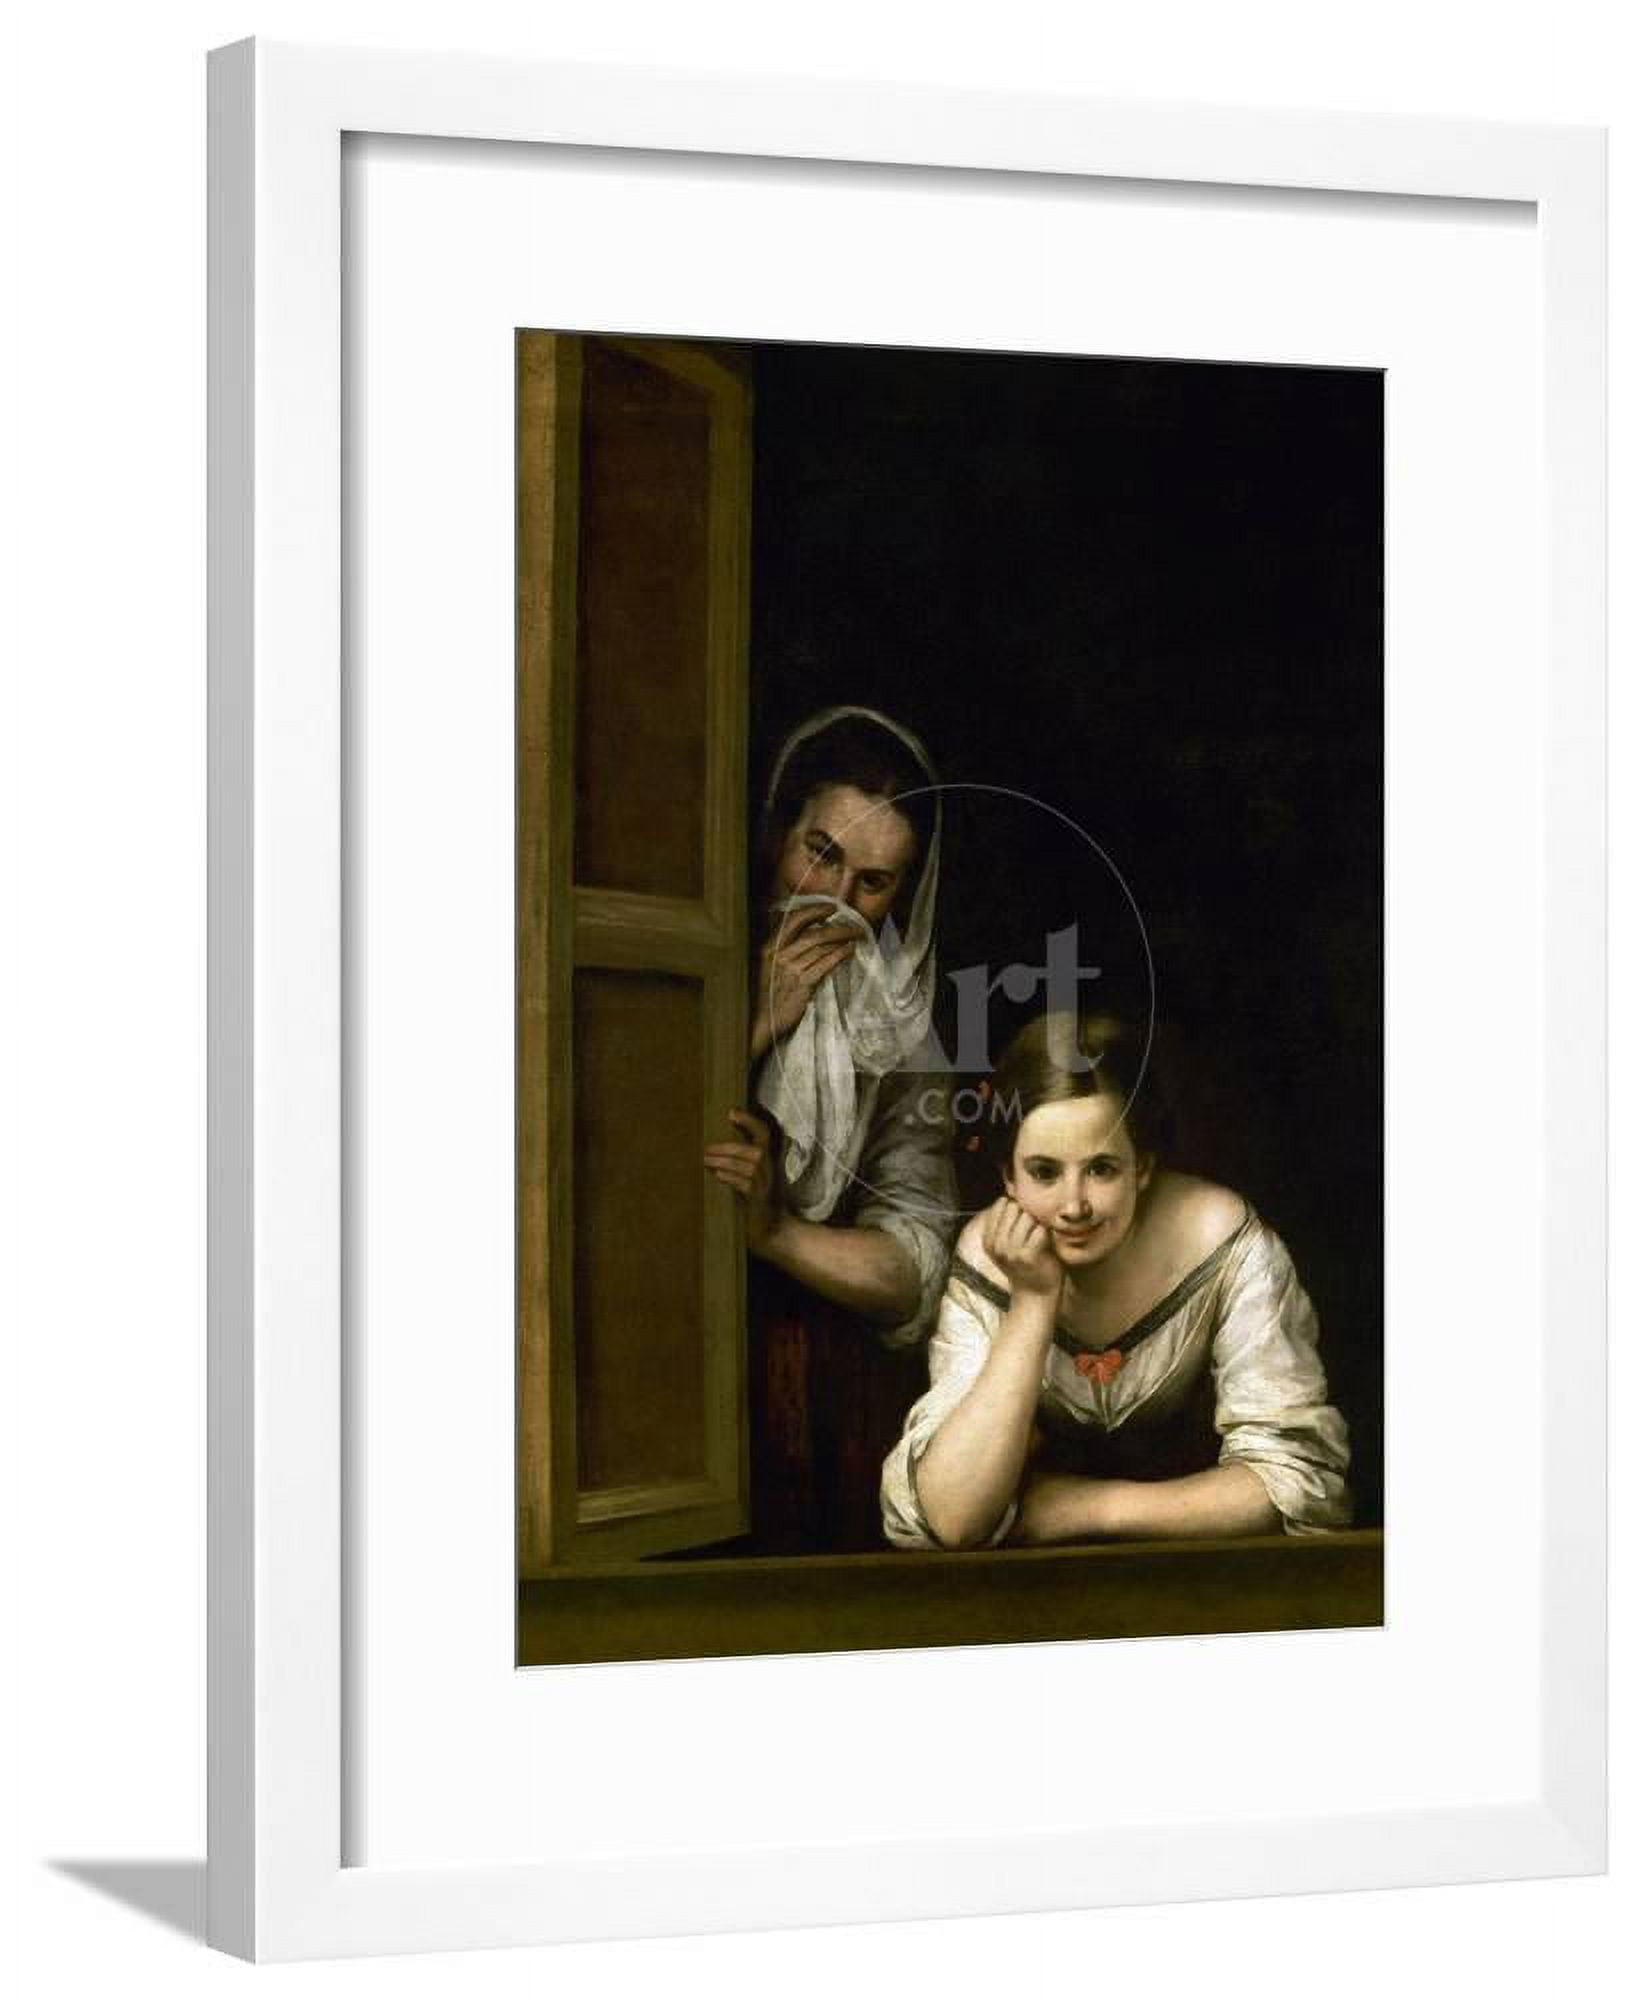 Women from Galicia at the Window, 16551660, Figurative Framed Art Print  Wall Art by Bartolome Esteban Murillo Sold by Art.Com 